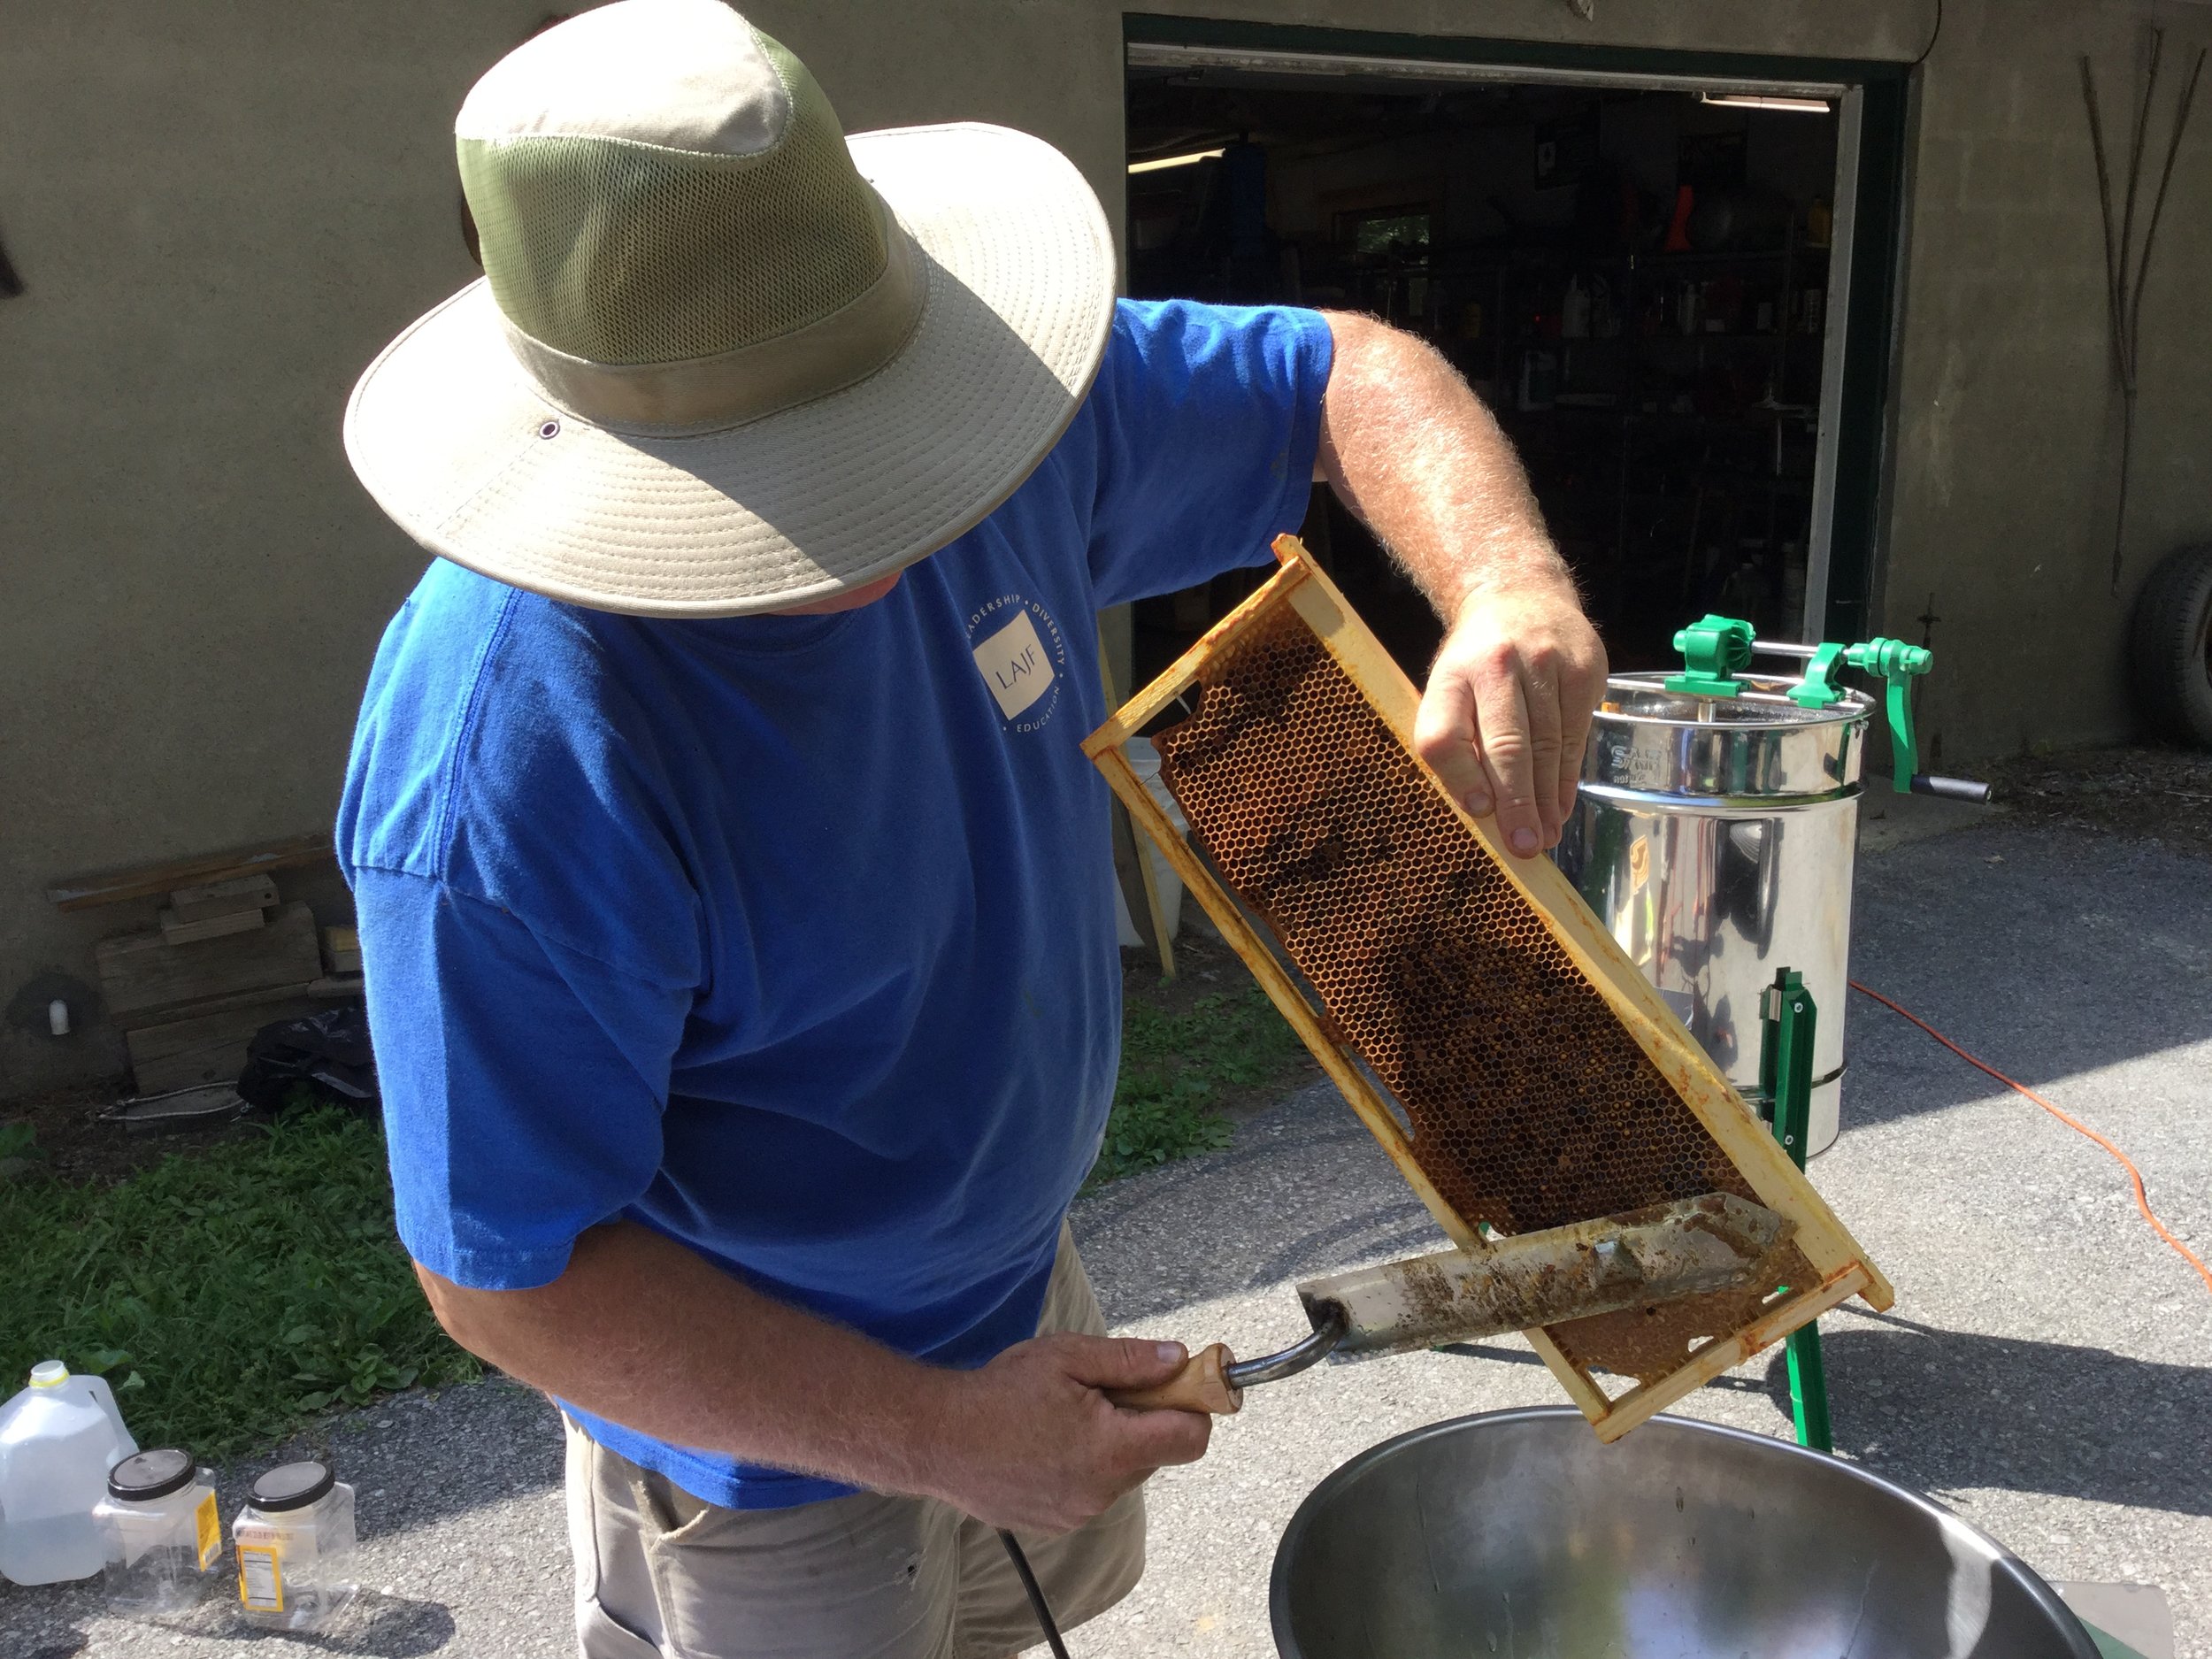  Alongside instructions, we have project time. Projects give campers the opportunity to create, build, and learn how to construct something new. Projects range from producing honey from our on-site beehives to building a new lean-to.&nbsp; 